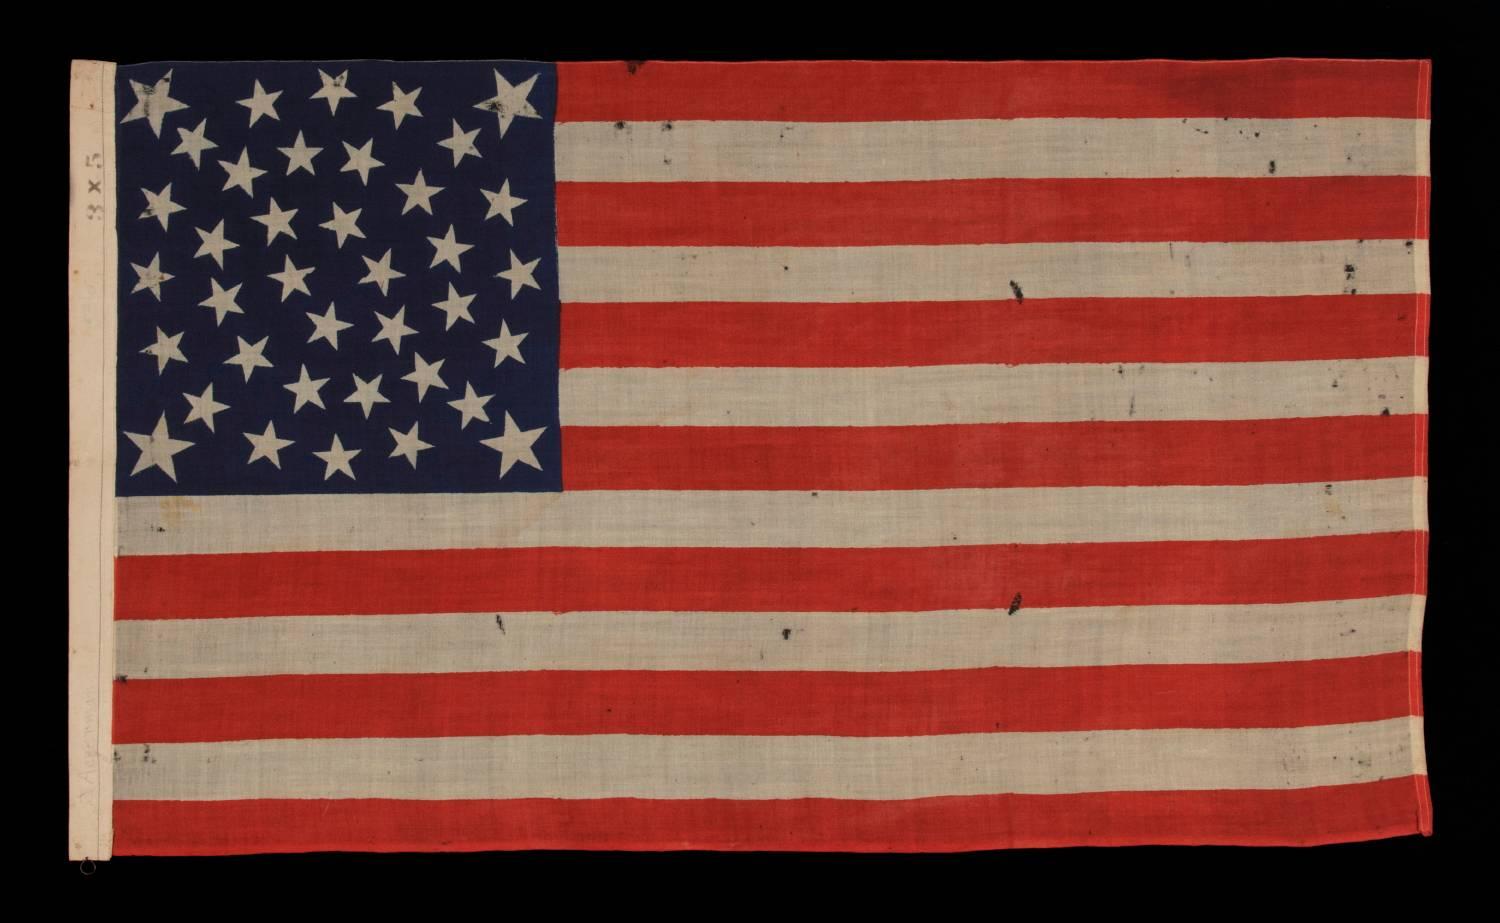 38 STARS ON AN EXTRAORDINARY ANTIQUE FLAG MADE FOR THE 1876 CENTENNIAL EXPOSITION, LIKELY BY THE HORSTMANN COMPANY IN PHILADELPHIA, WITH AN EXTREMELY RARE FORM OF THE MEDALLION CONFIGURATION THAT BEARS AN ELLIPSE OF SIX STARS IN THE CENTER AND A